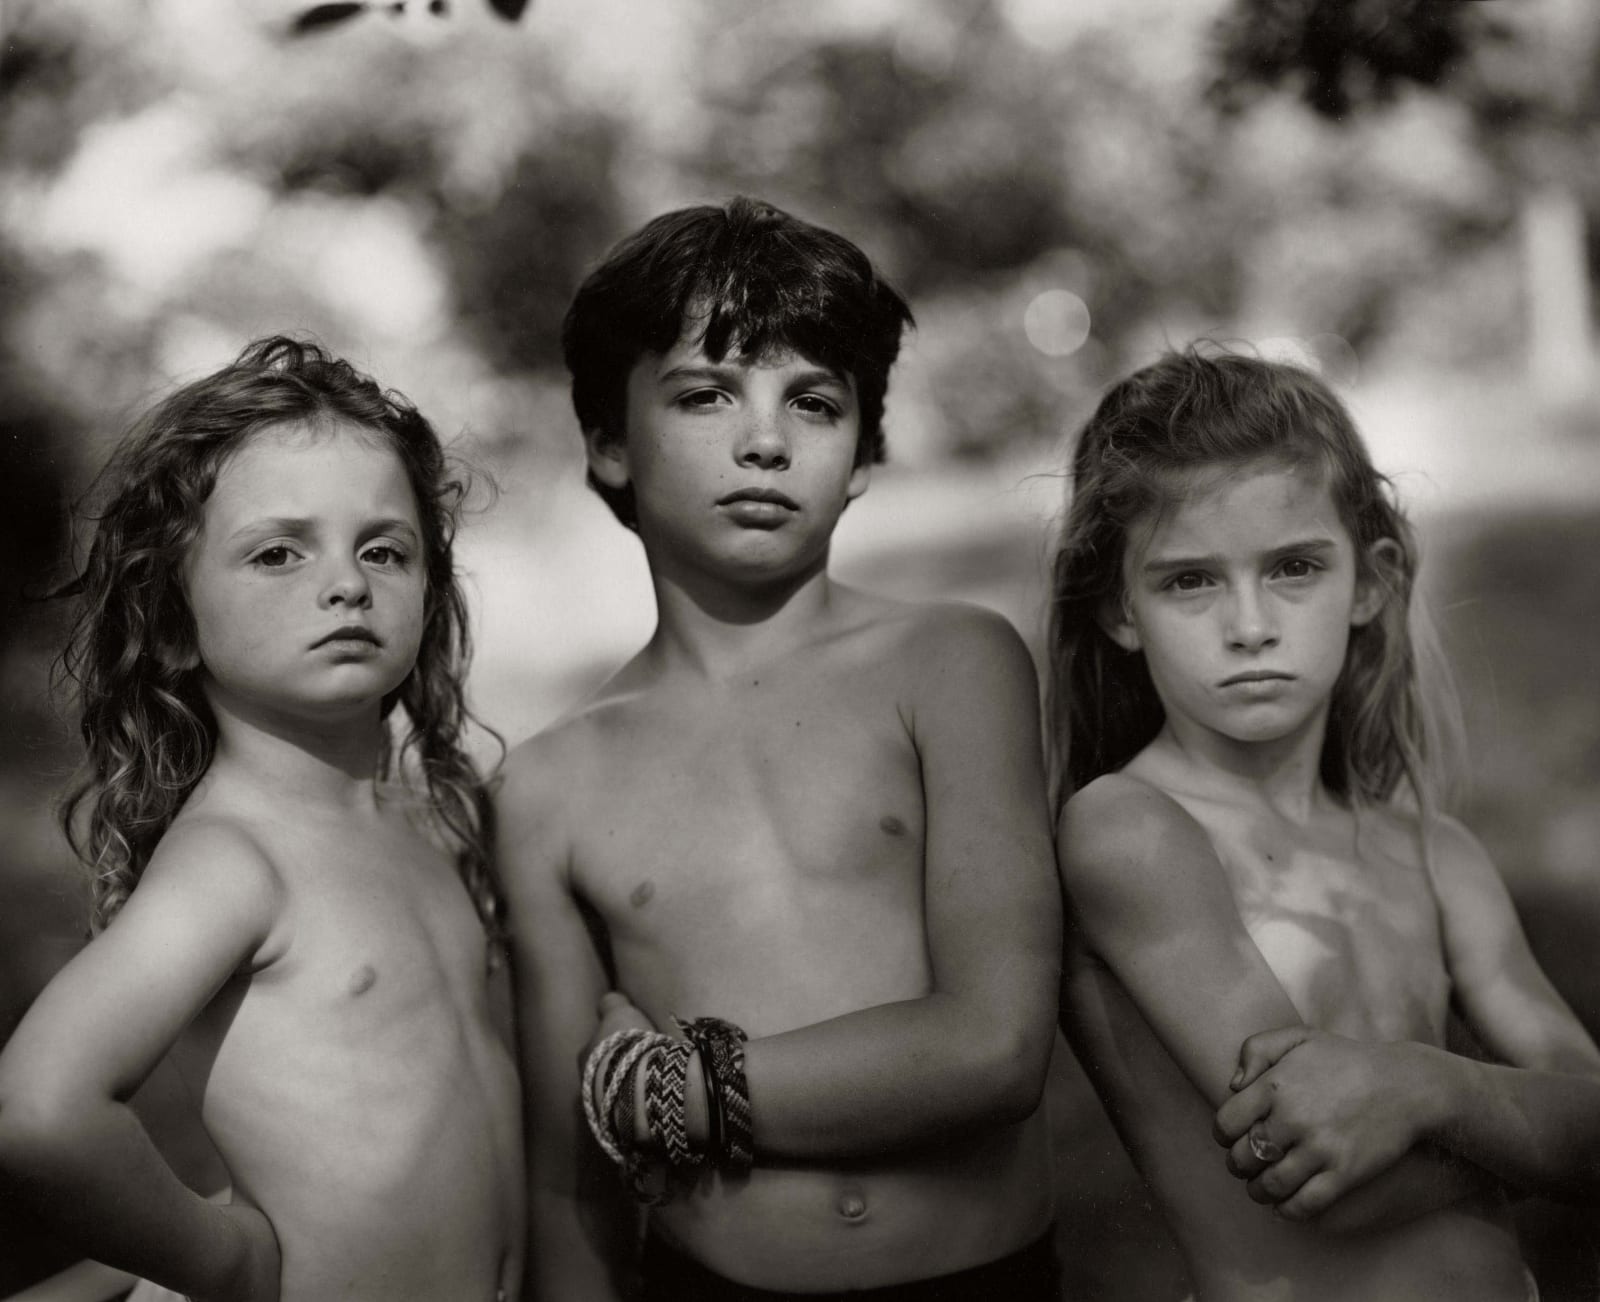 Emmett, Jessie and Virginia posing outdoors, from the Immediate Family series, by Sally Mann